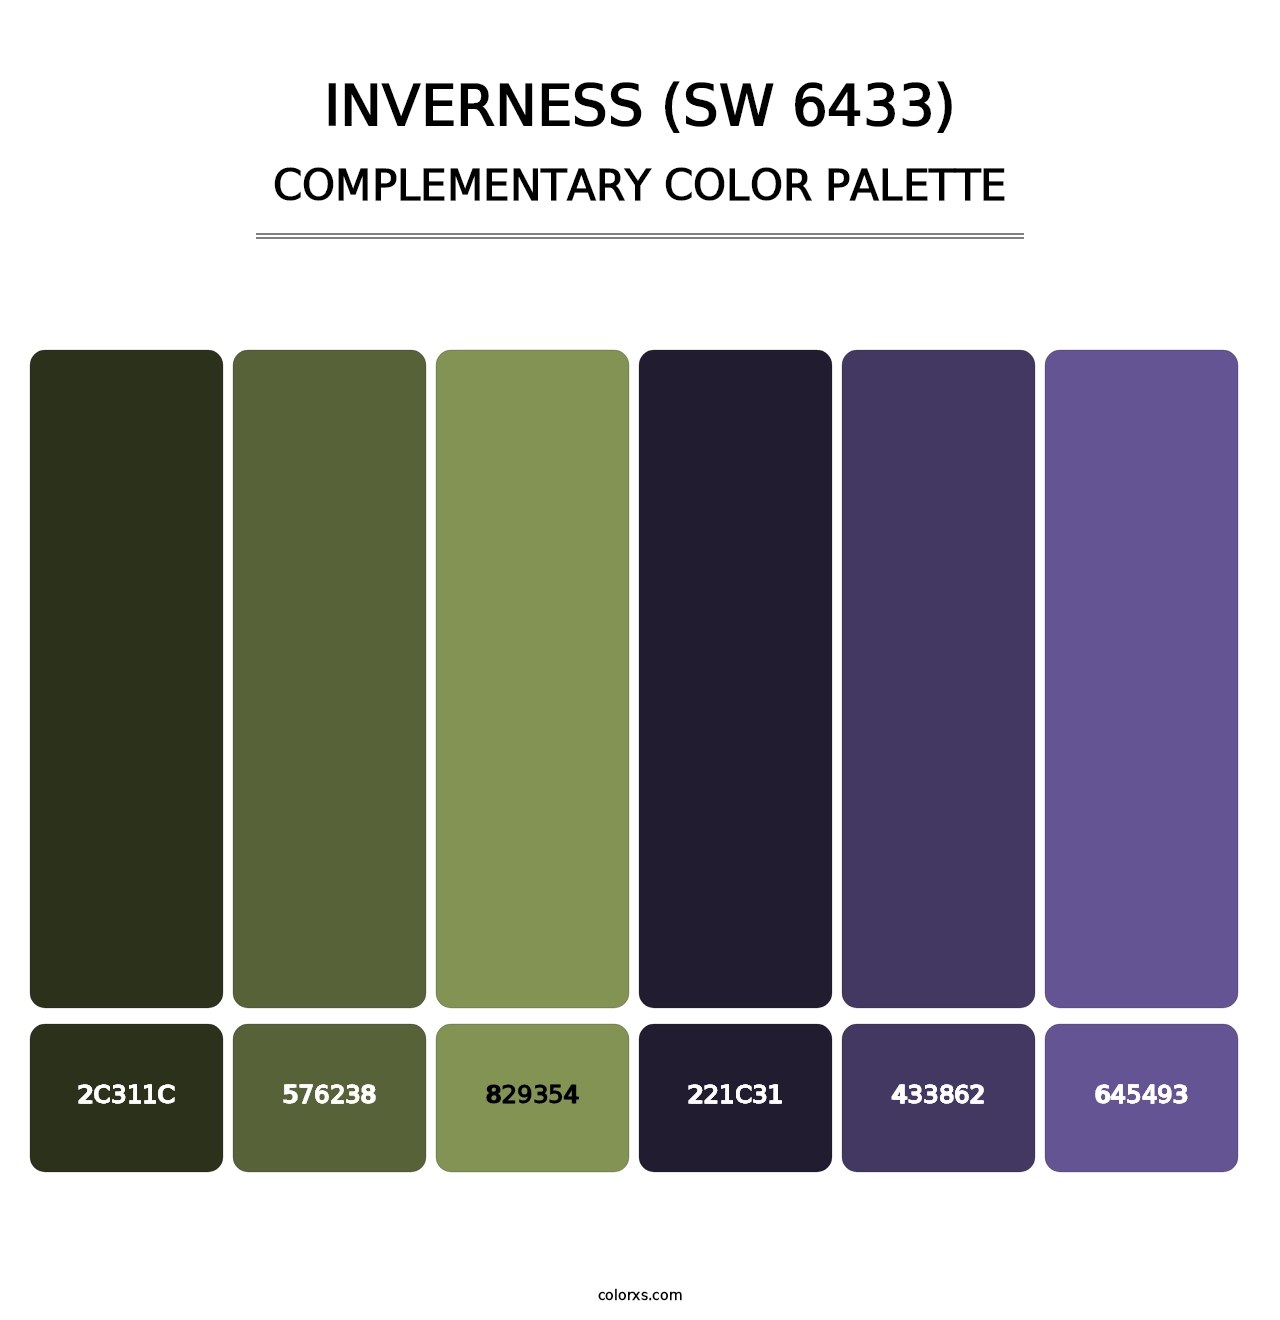 Inverness (SW 6433) - Complementary Color Palette